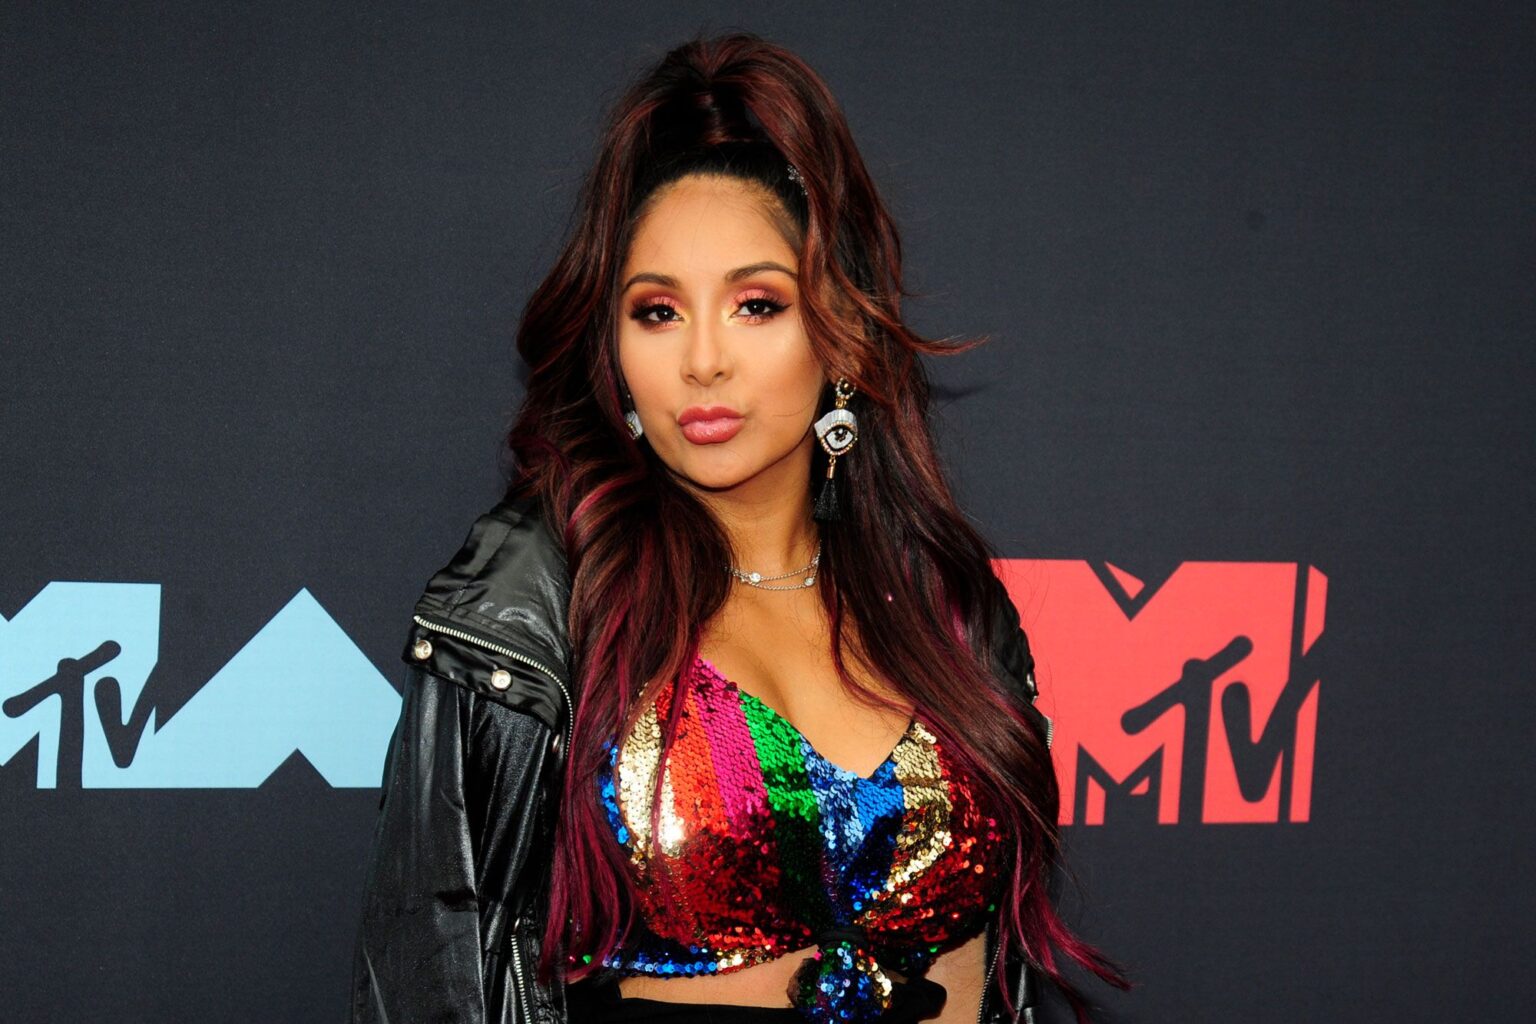 Snooki is offically back on 'Jersey Shore: Family Vacation'! Relive Snooki's wildest moments on the show before the shore gang returns this June.